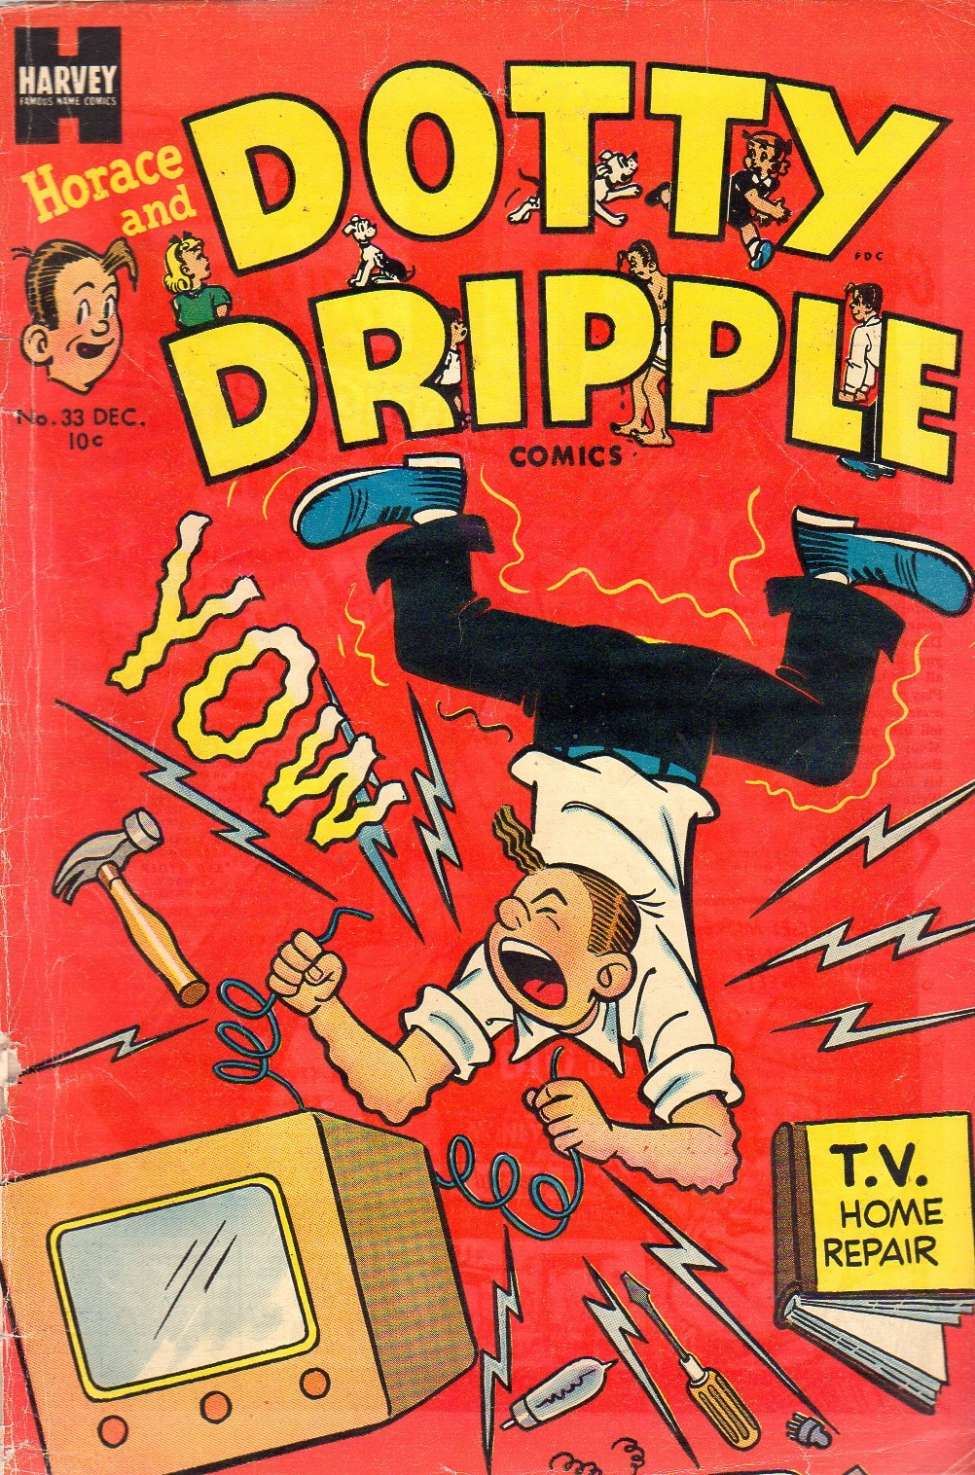 Comic Book Cover For Horace & Dotty Dripple 33